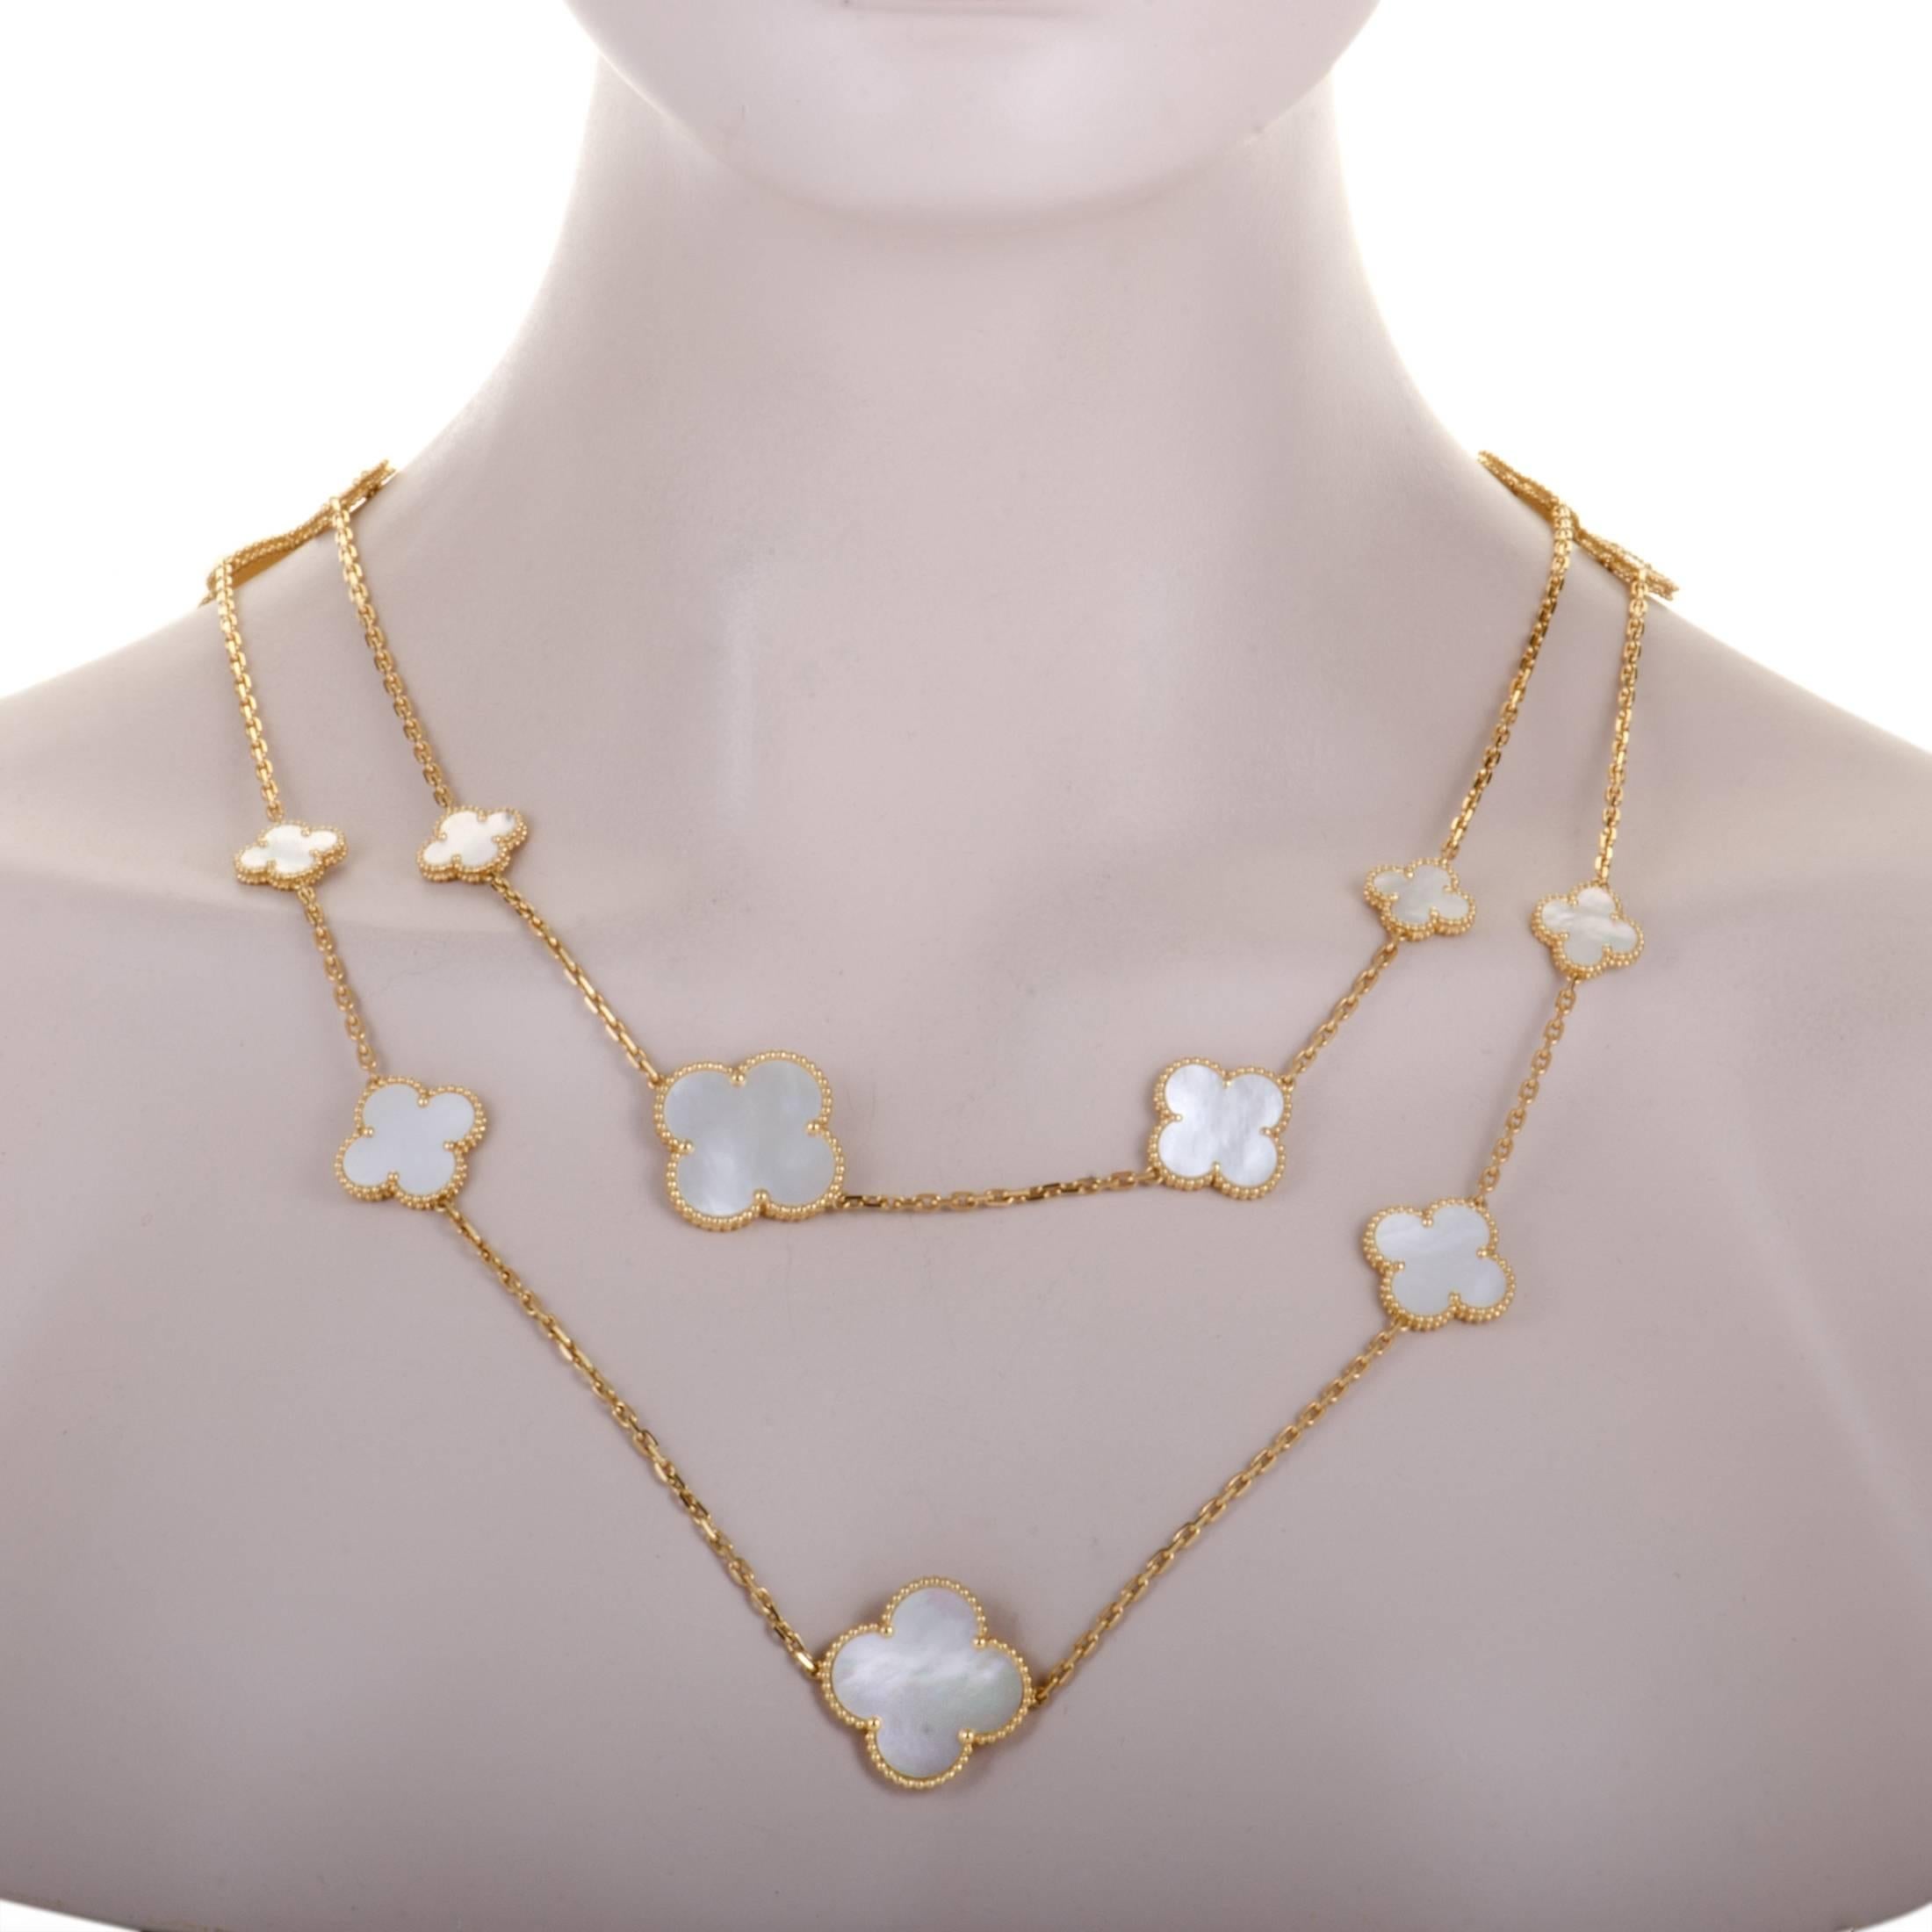 Presented within the iconic “Magic Alhambra” collection by Van Cleef & Arpels, this sublime necklace embodies the very essence of charming femininity and classy elegance. The necklace is made of 18K yellow gold and it is embellished with mother of